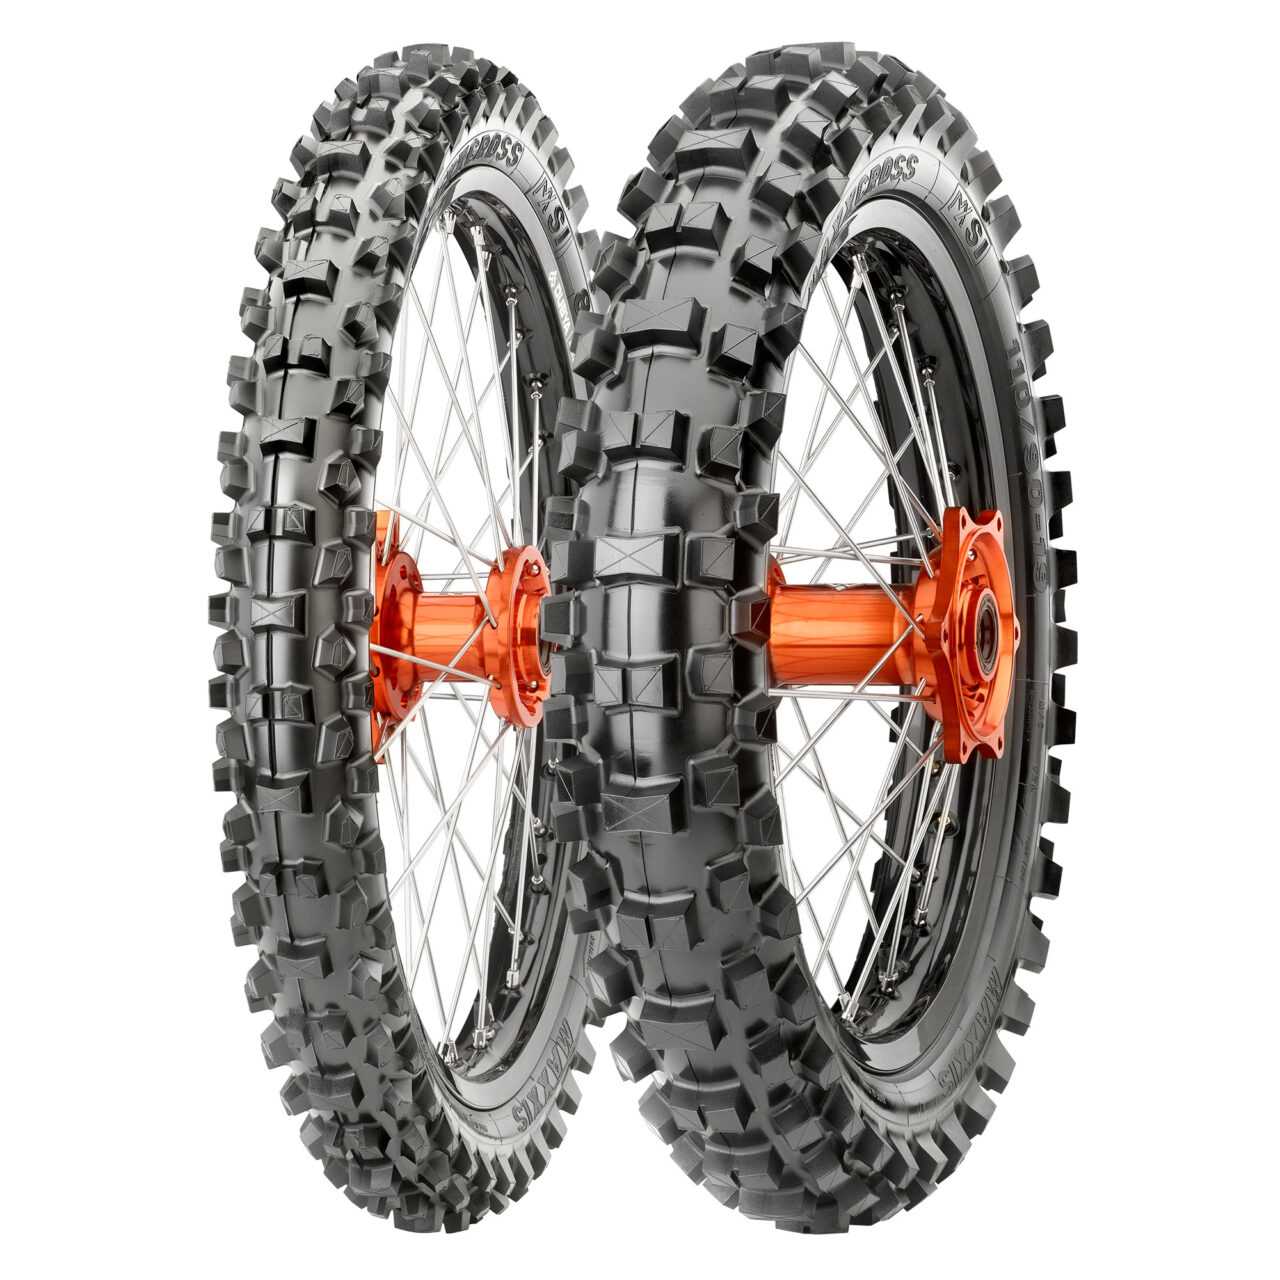 MAXXIS MAXXCROSS MX-SI Front and Rear pair three-quarter angle view